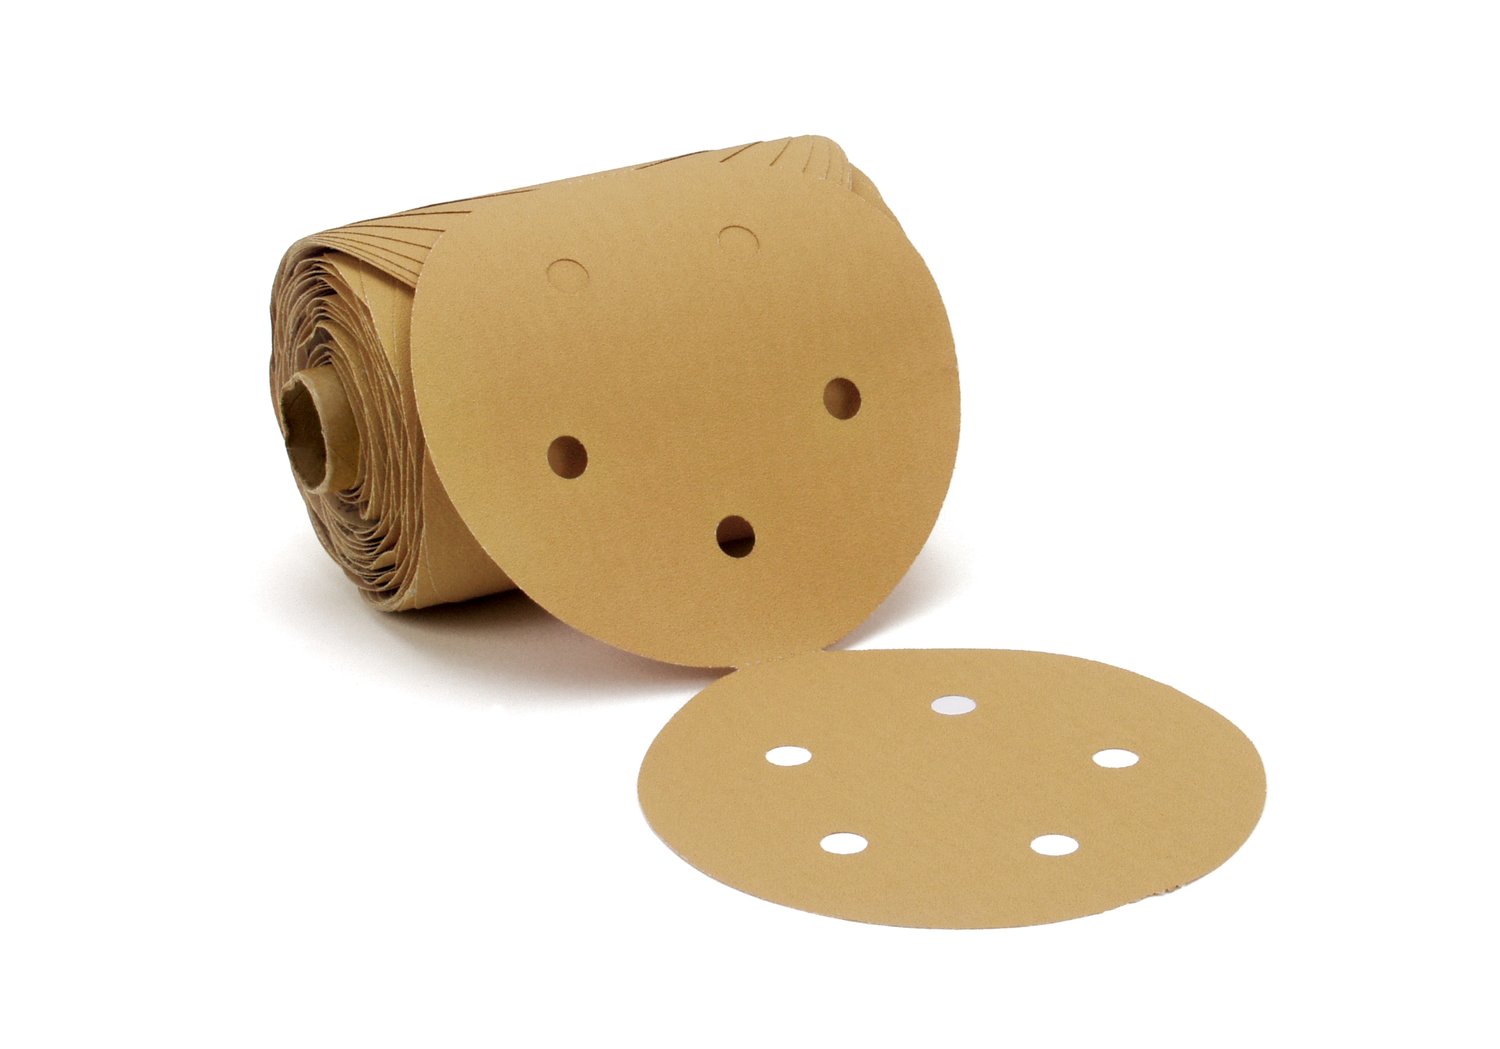 7000118112 - 3M Stikit Gold Paper Disc Roll 216U, 5 in x NH 5 Holes P320 A-weight,
D/F, Die 500FH, 175 Discs/Roll, 6 Rolls/Case